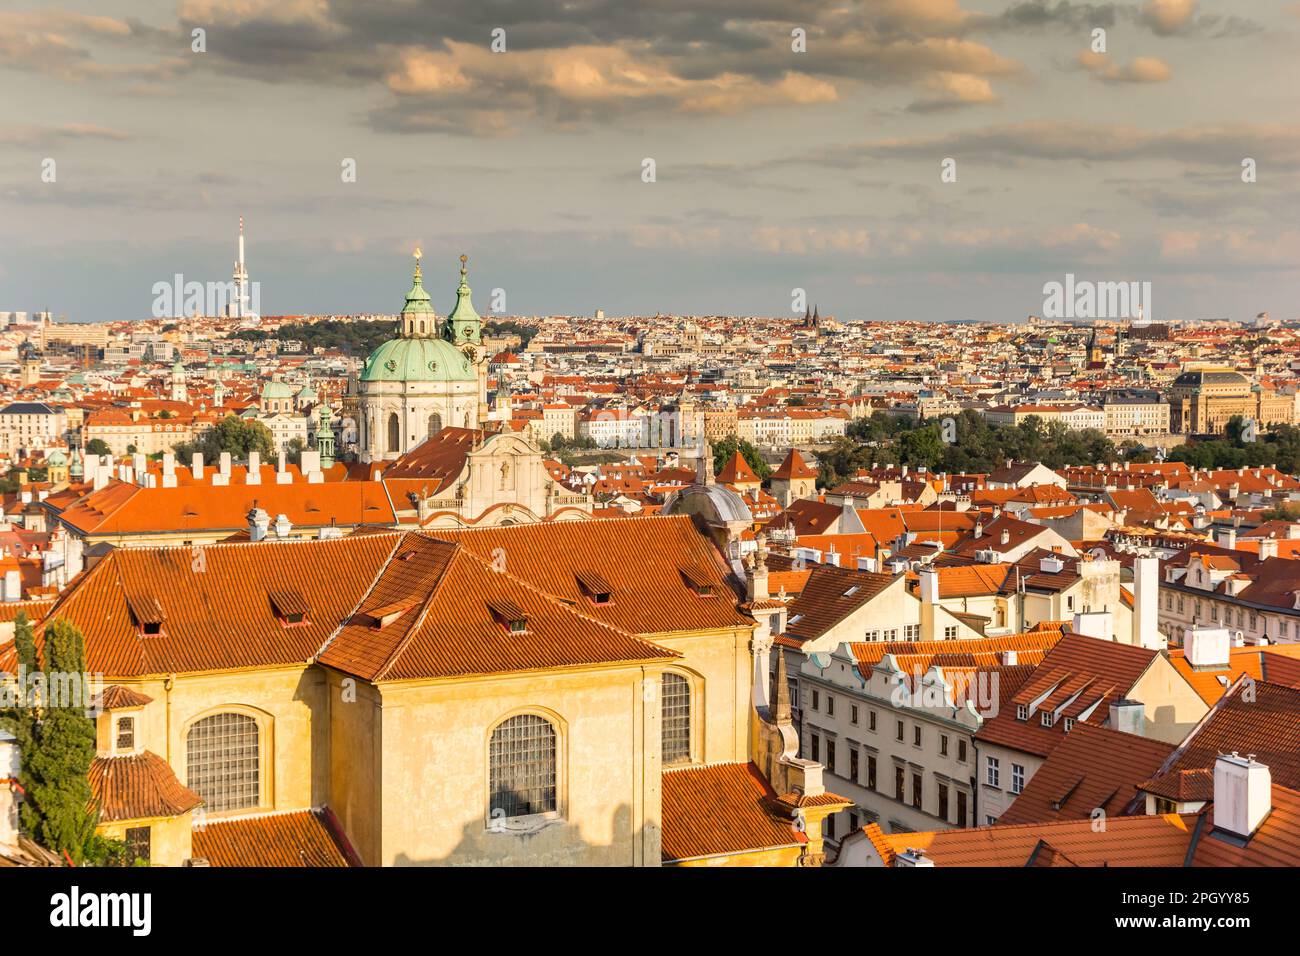 Areal view over the Nicholas church in the historic city of Prague, Czech Republic Stock Photo